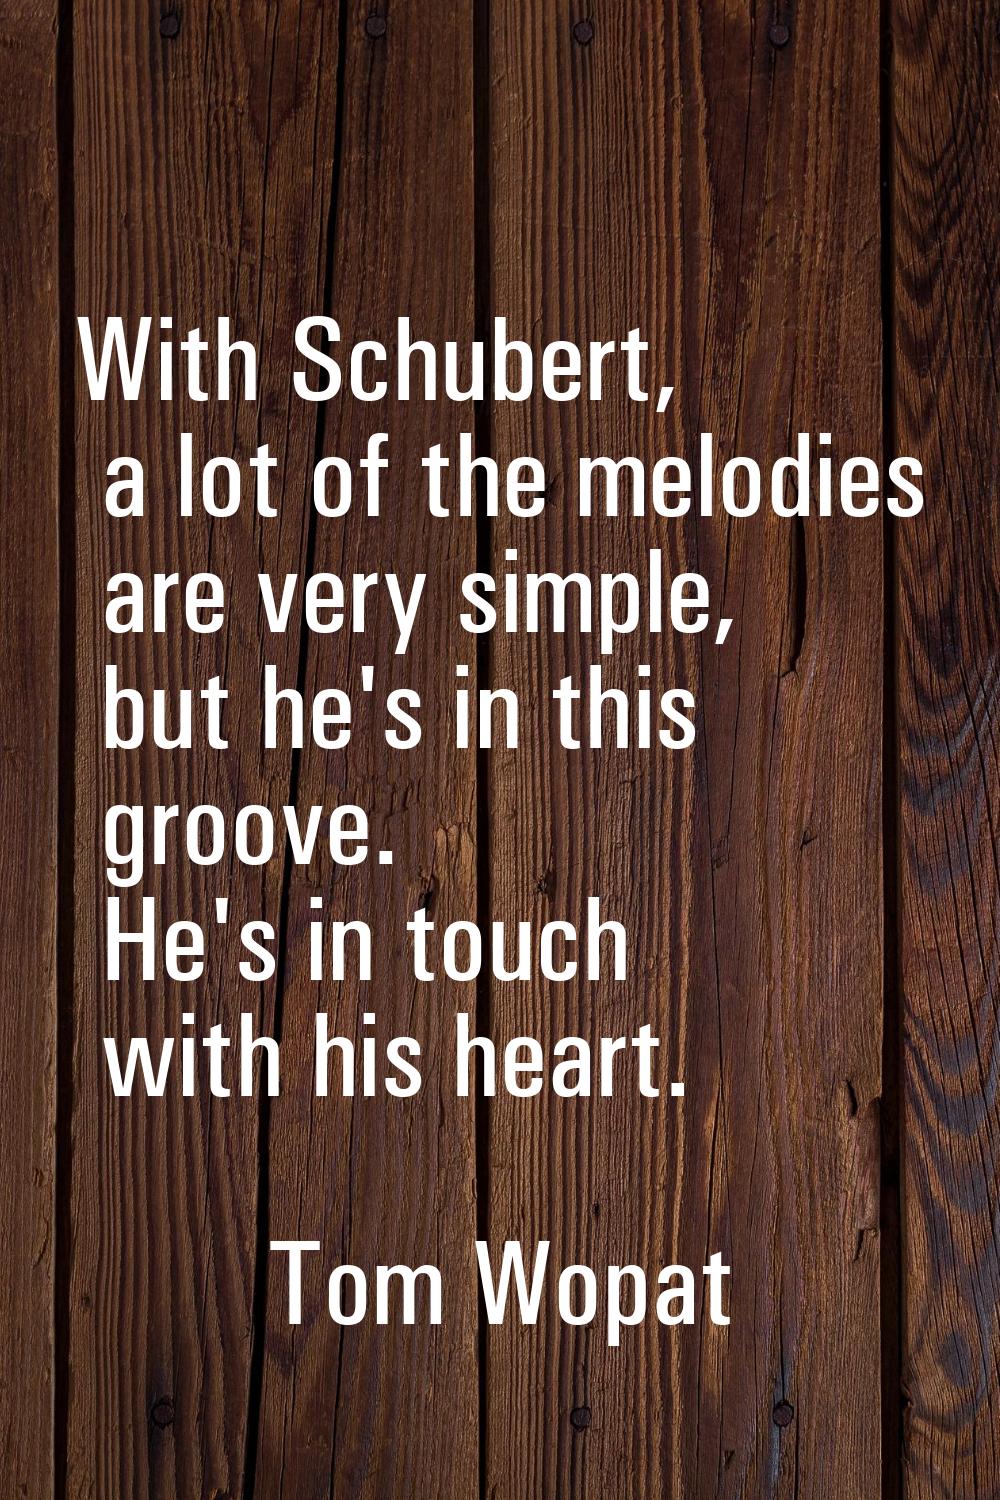 With Schubert, a lot of the melodies are very simple, but he's in this groove. He's in touch with h